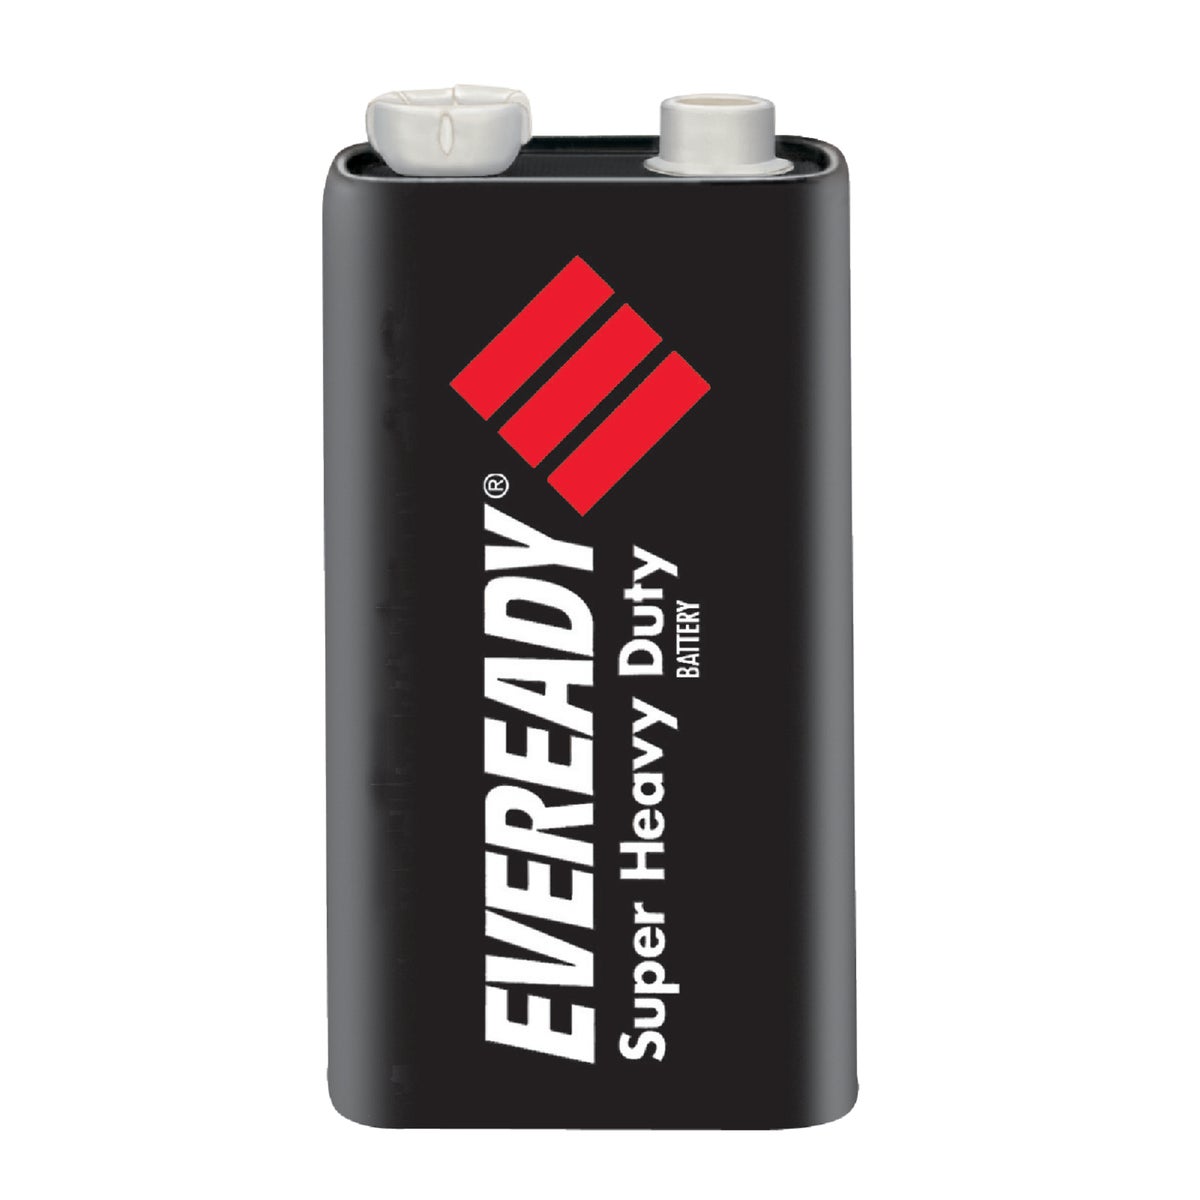 Item 813659, Heavy-duty battery designed to provide reliable power.